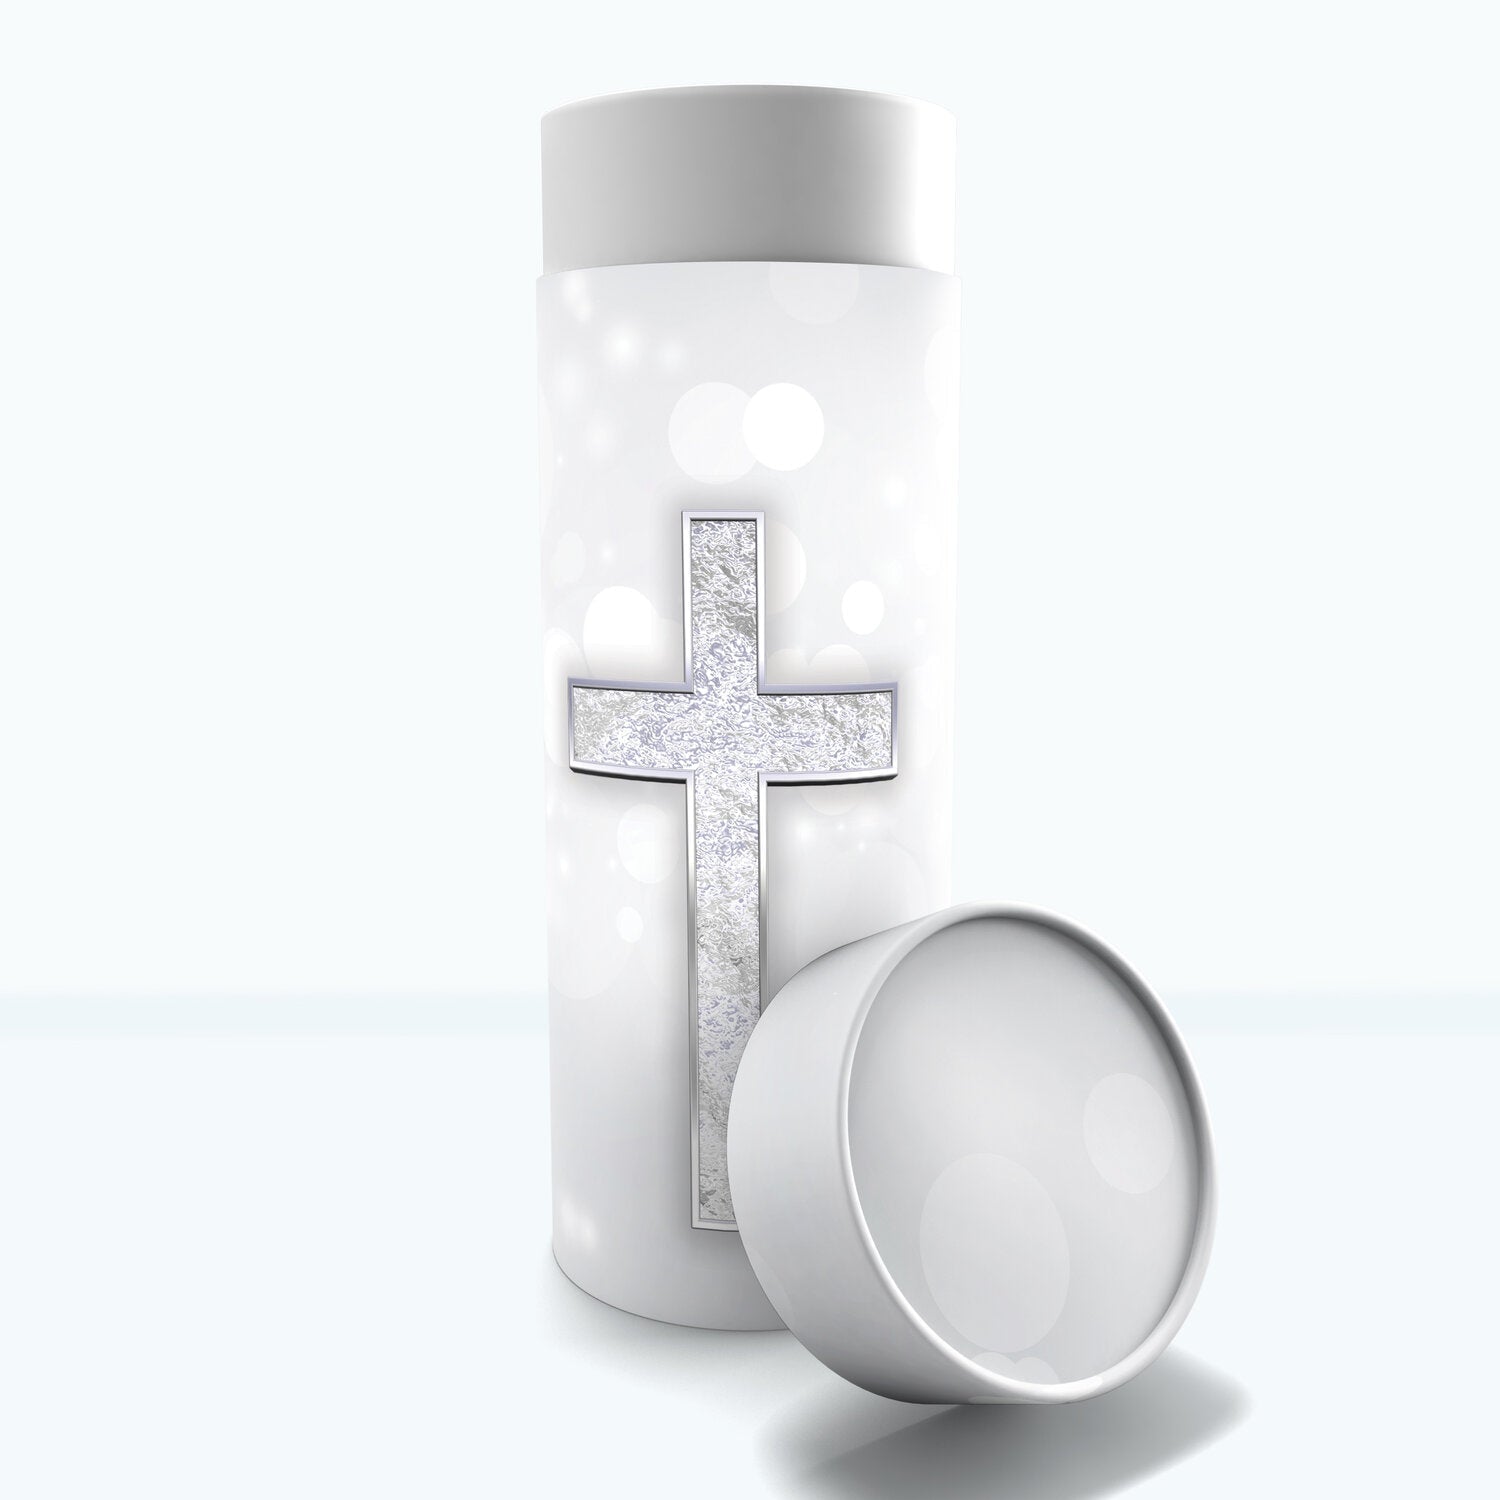 Commemorative Cremation Urns Small Silver Cross Biodegradable & Eco Friendly Burial or Scattering Urn / Tube